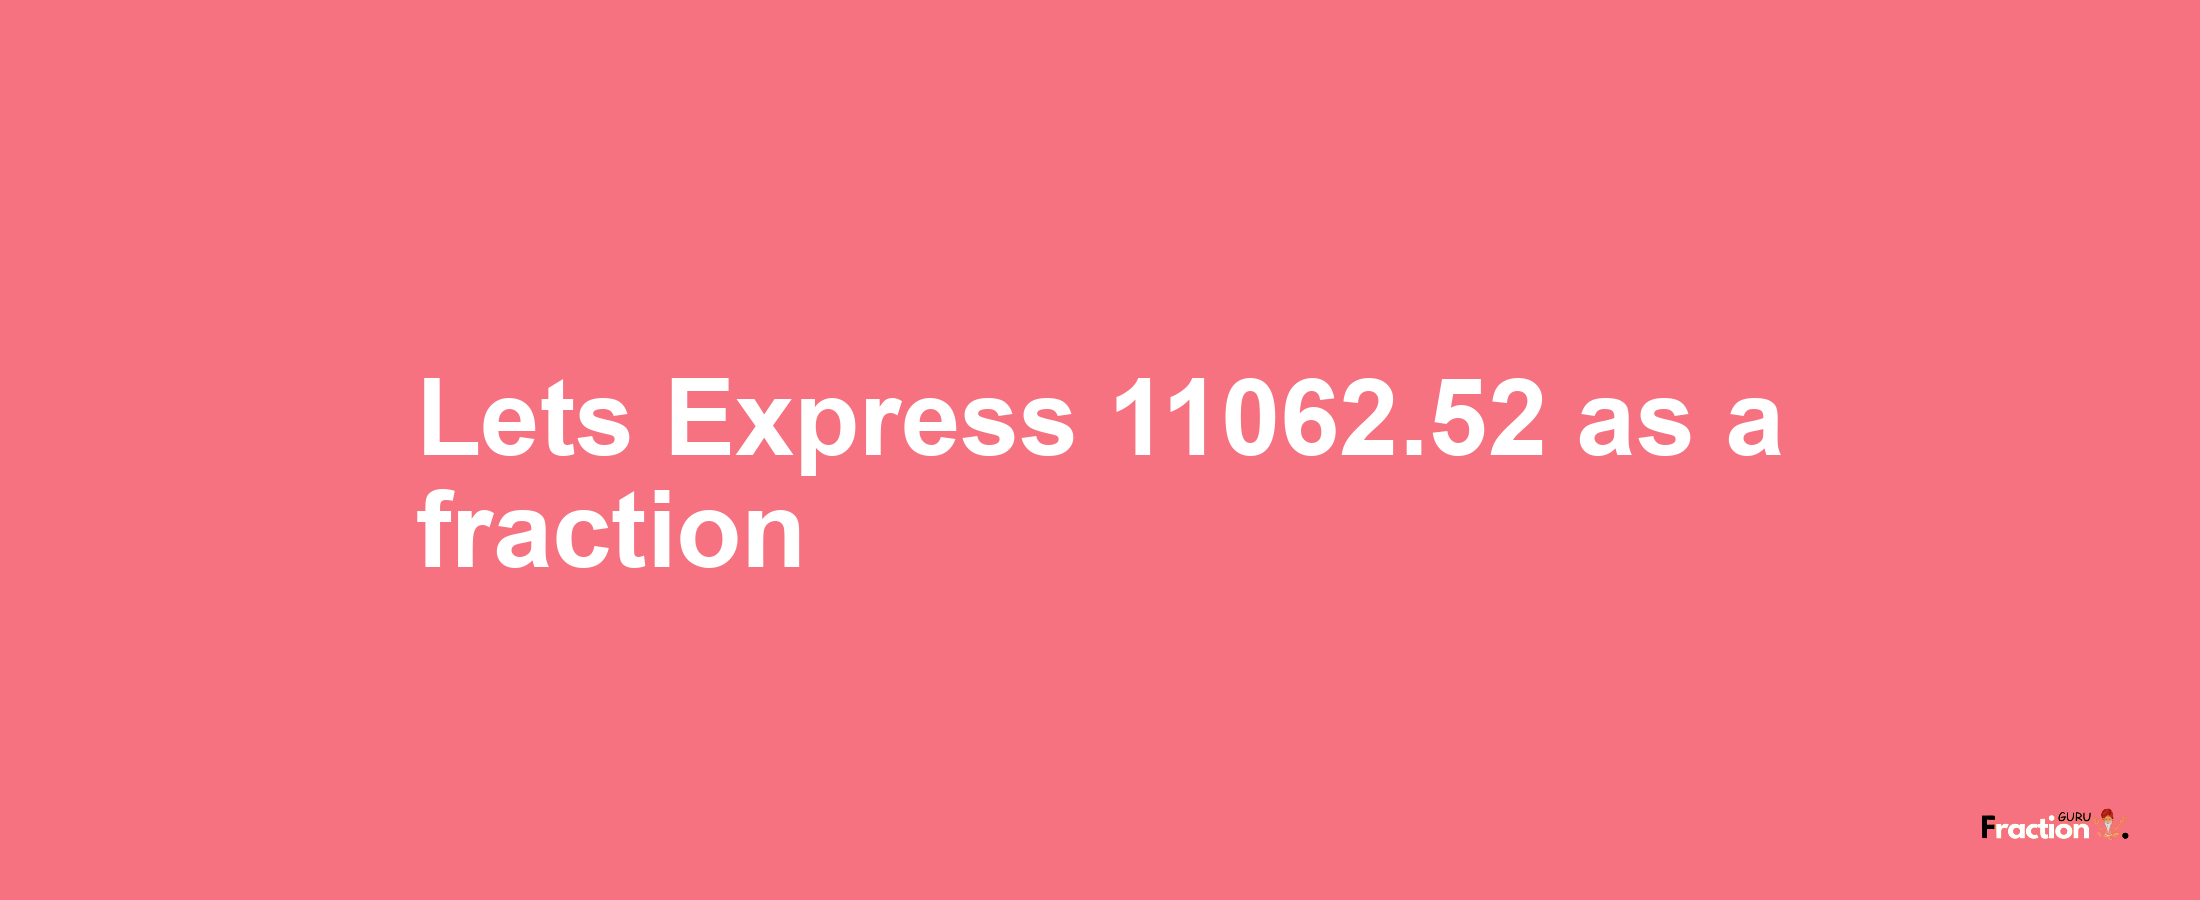 Lets Express 11062.52 as afraction